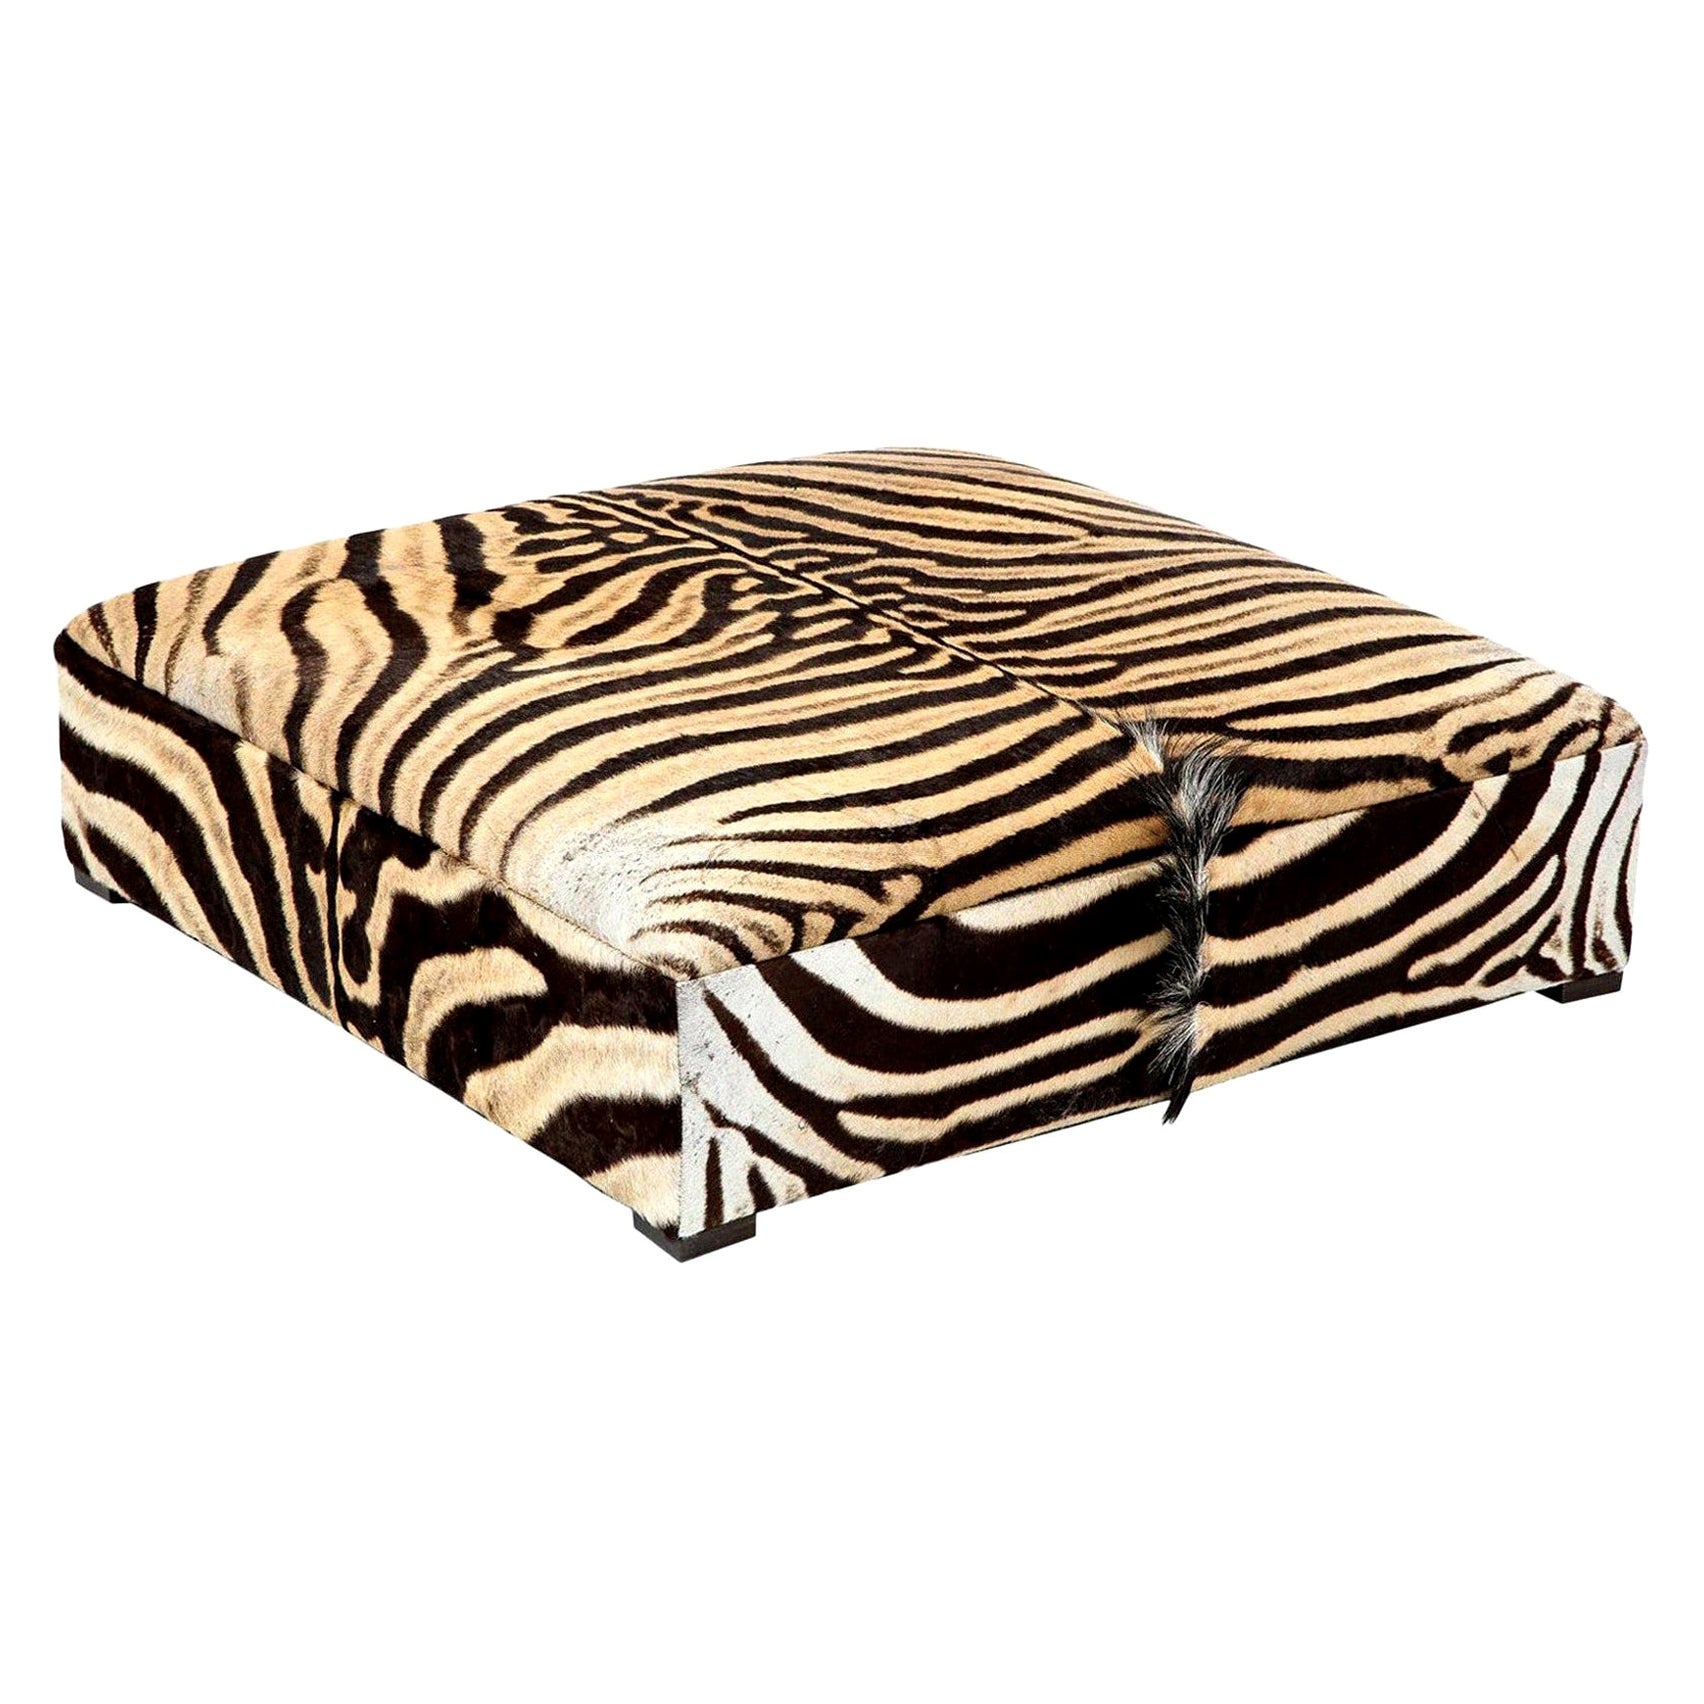 Zebra Ottoman / Coffee Table, Large Square, Two Zebra hides, Custom Made In USA For Sale